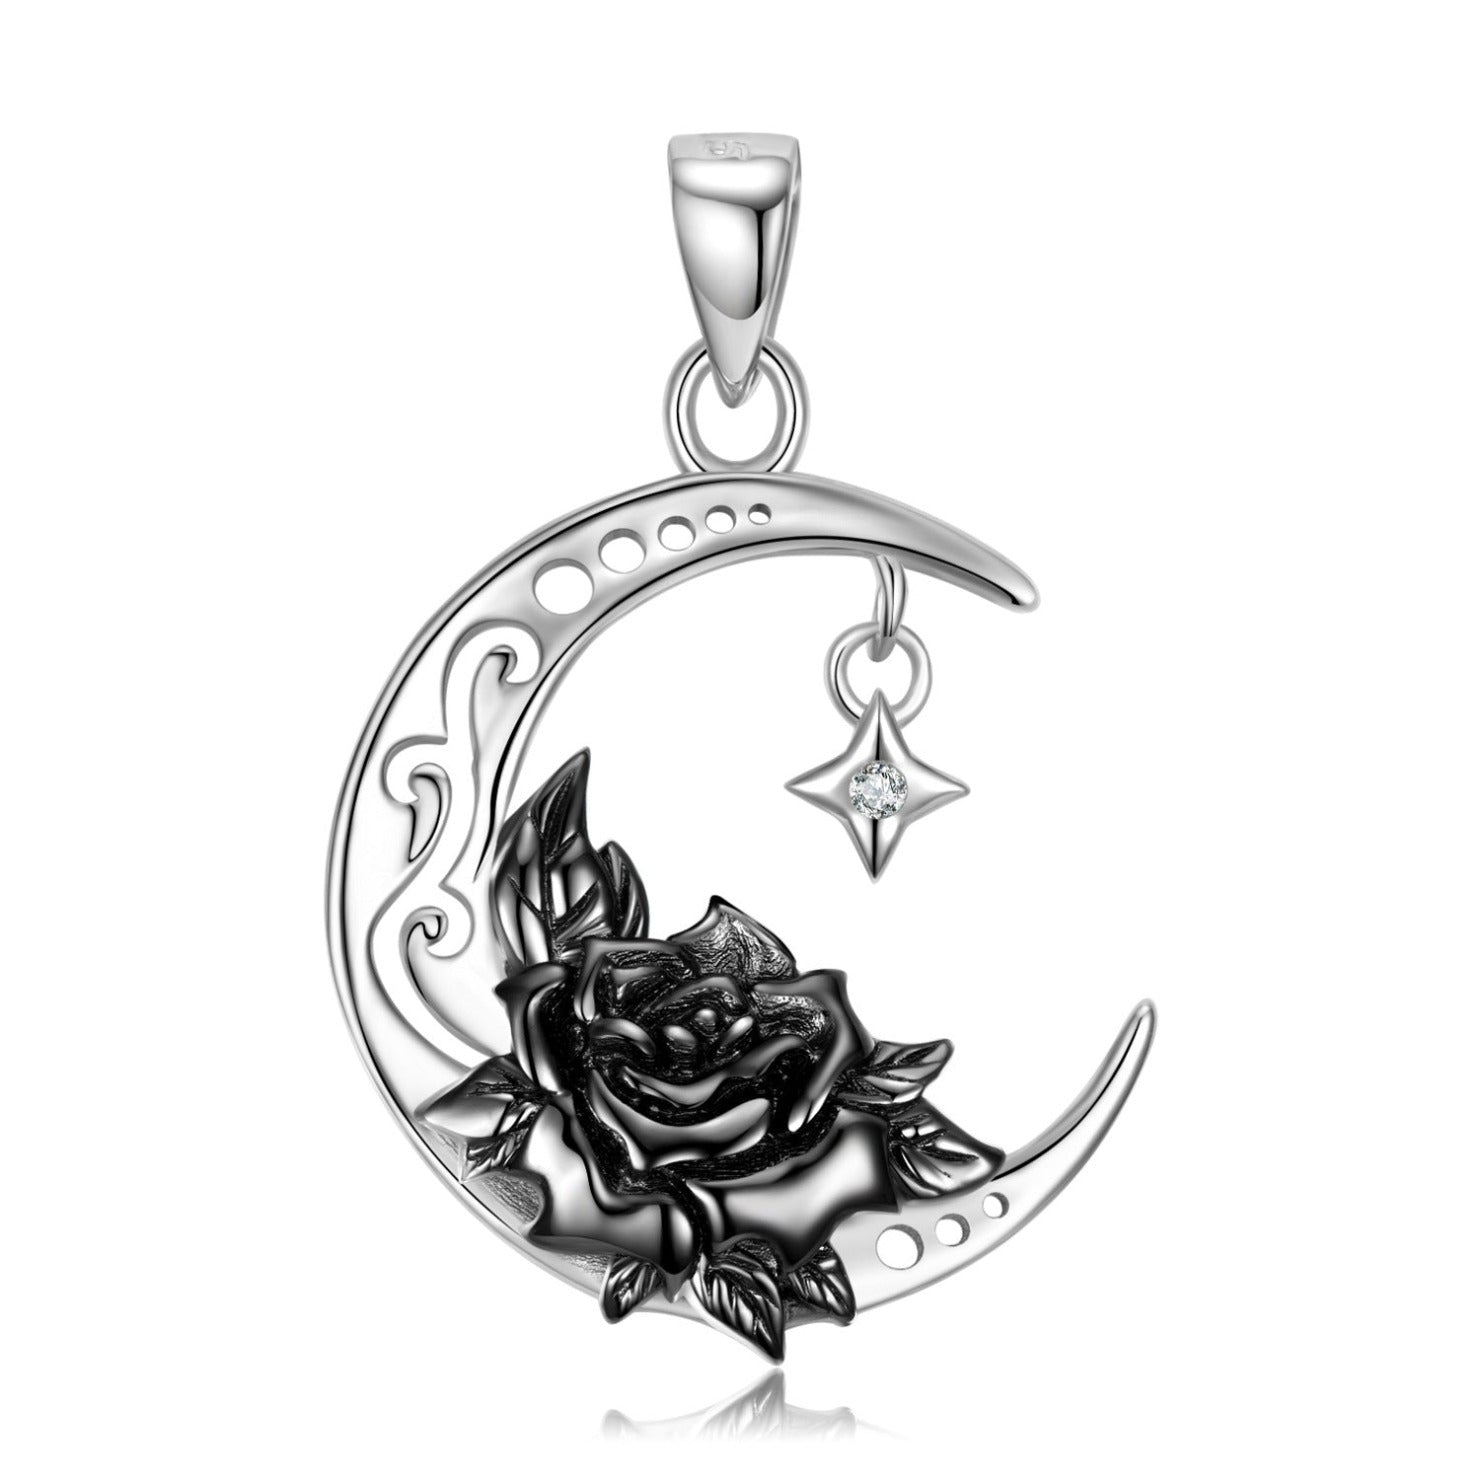 Boltiesd™ Black Water Lily and Crescent Moon Necklace in Sterling Silver S925 for Halloween - Boltiesd™